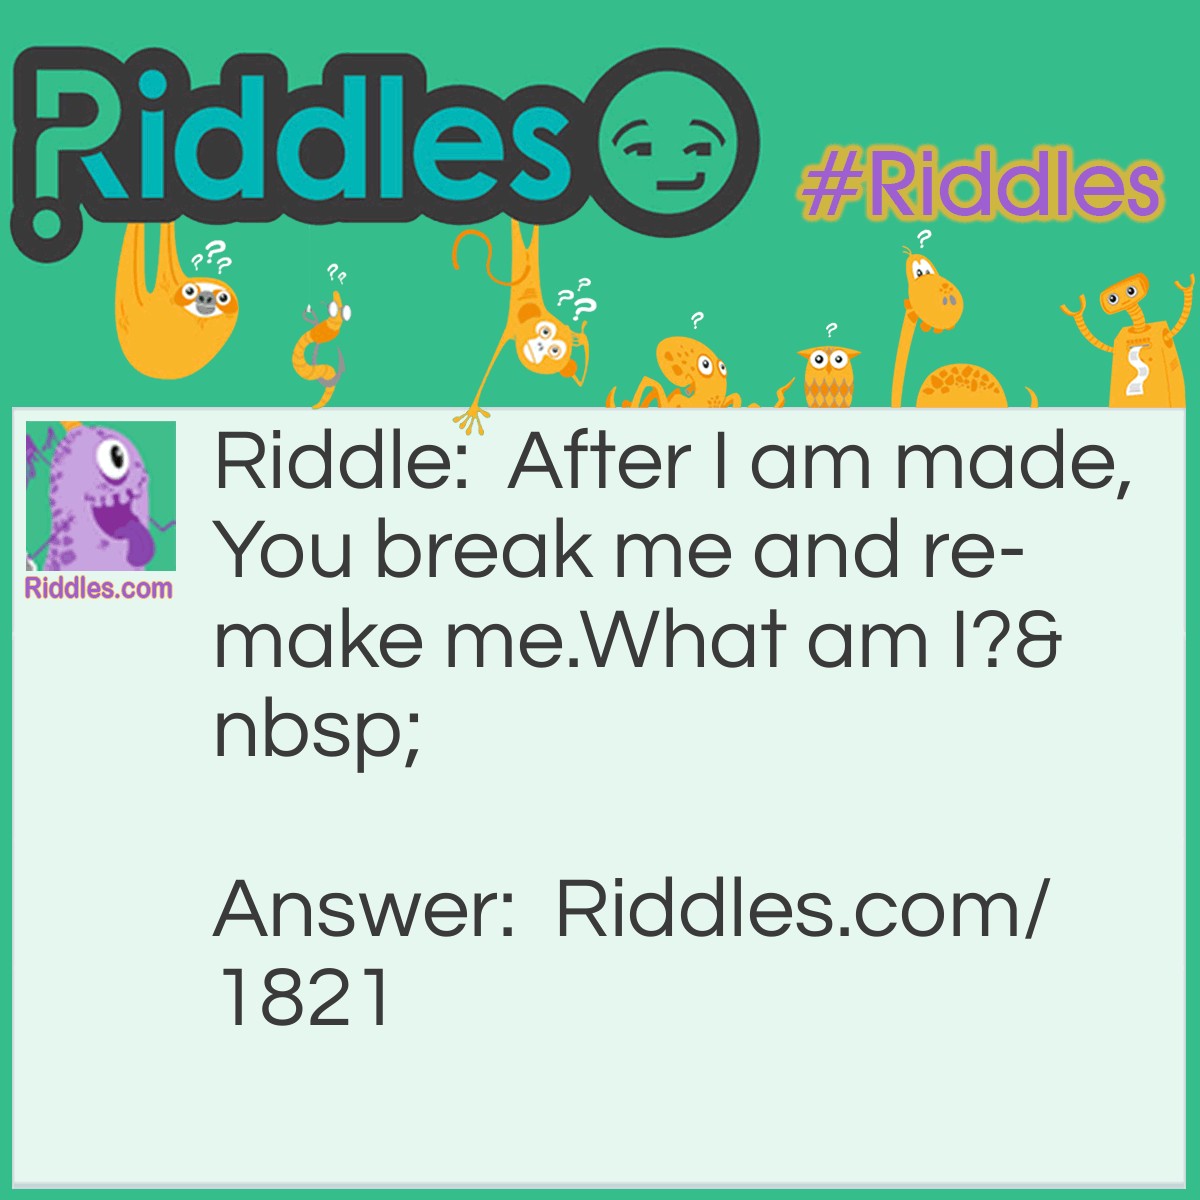 Riddle: After I am made,
You break me and re-make me.
What am I?  Answer: Egg